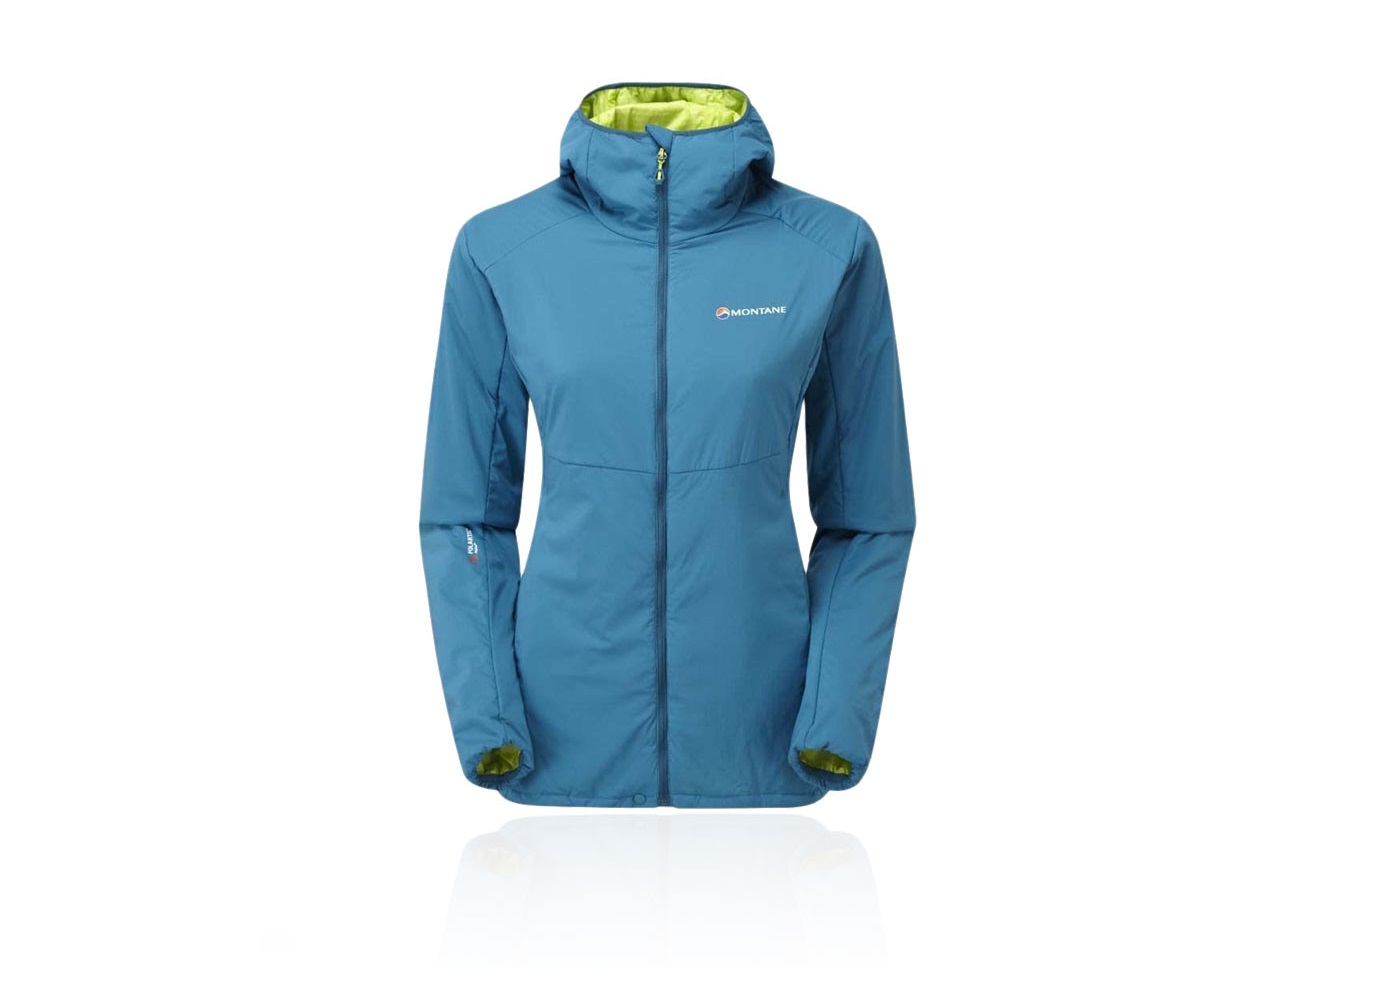 Designed for stop-start activities in the mountains where core body temperature regulation is key, the Montane Halogen Alpha Jacket combines good looks with cutting-edge materials.